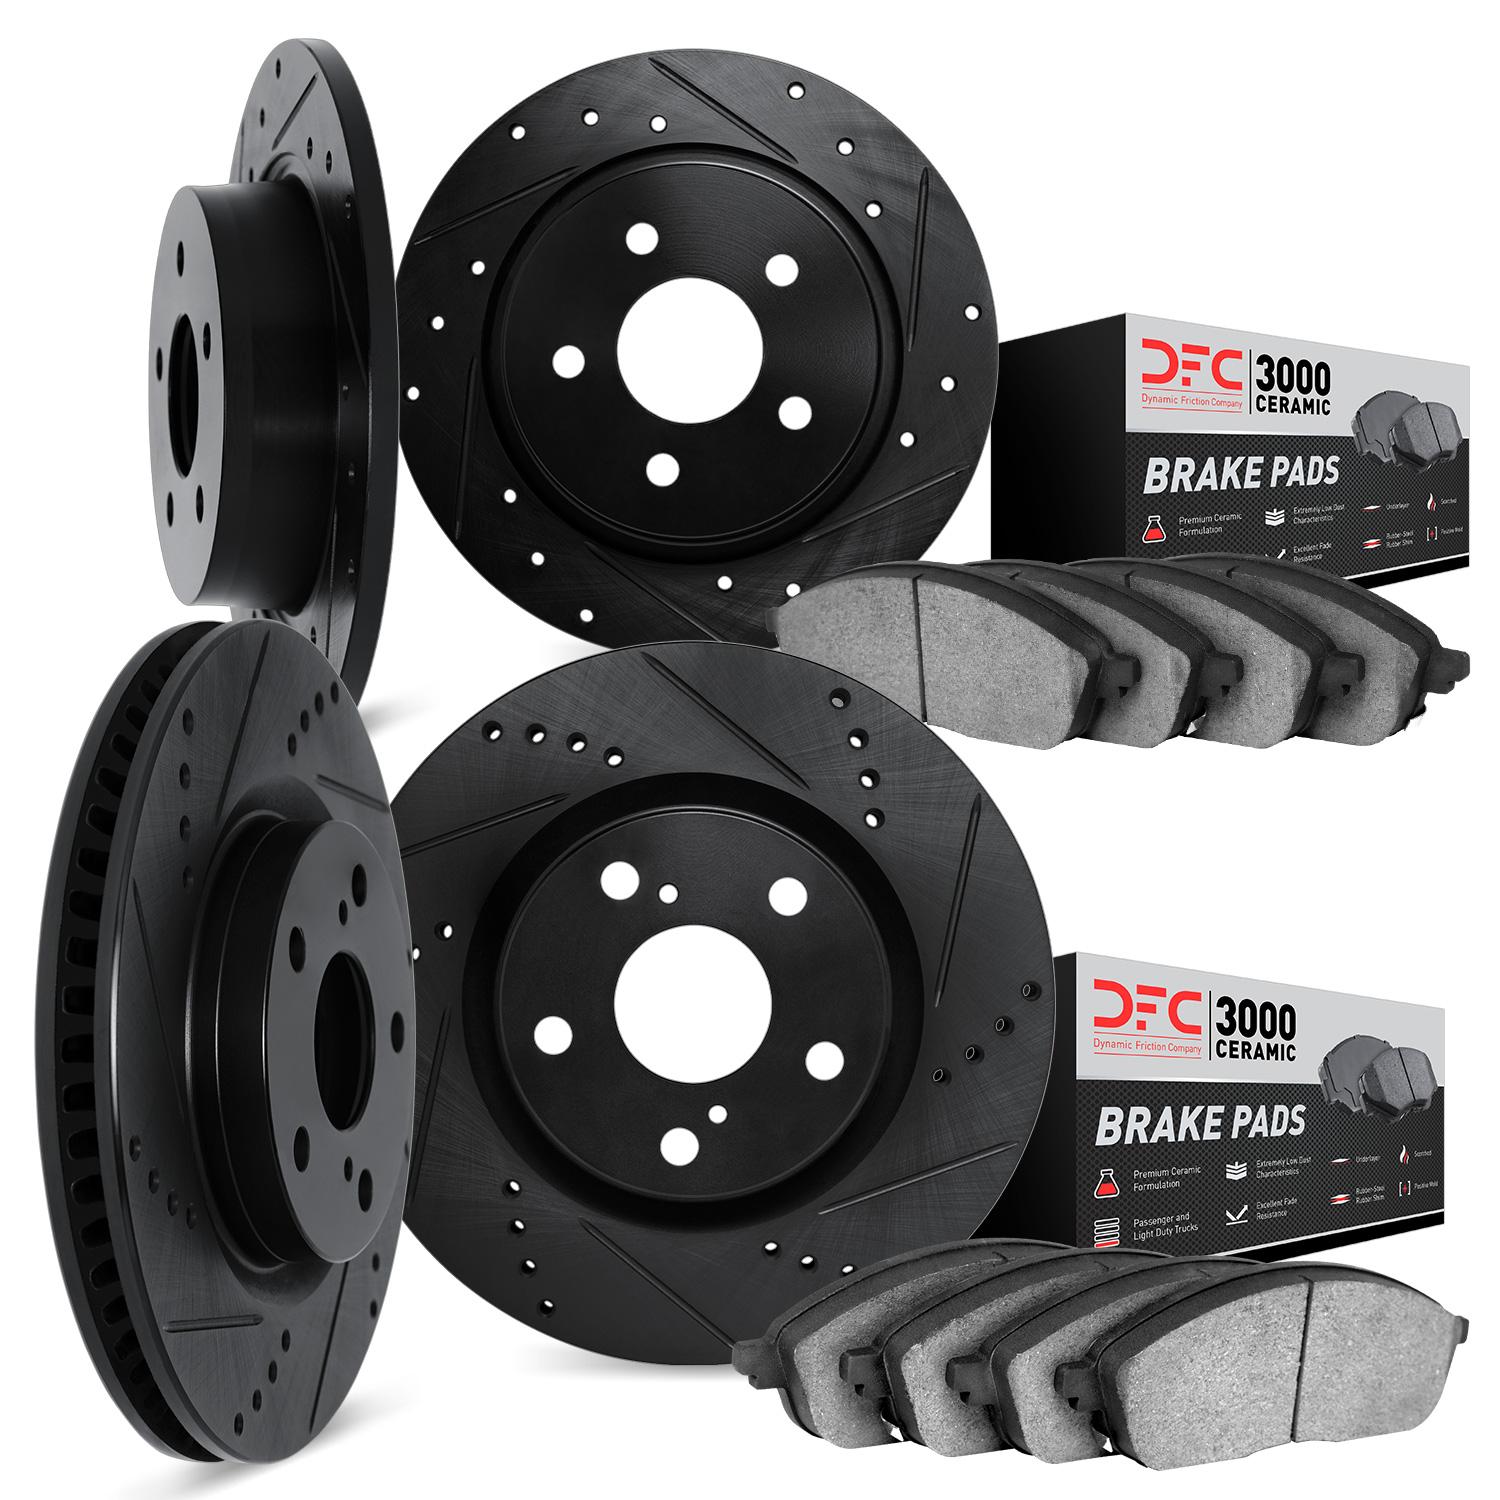 8304-42001 Drilled/Slotted Brake Rotors with 3000-Series Ceramic Brake Pads Kit [Black], 1993-1994 Mopar, Position: Front and Re